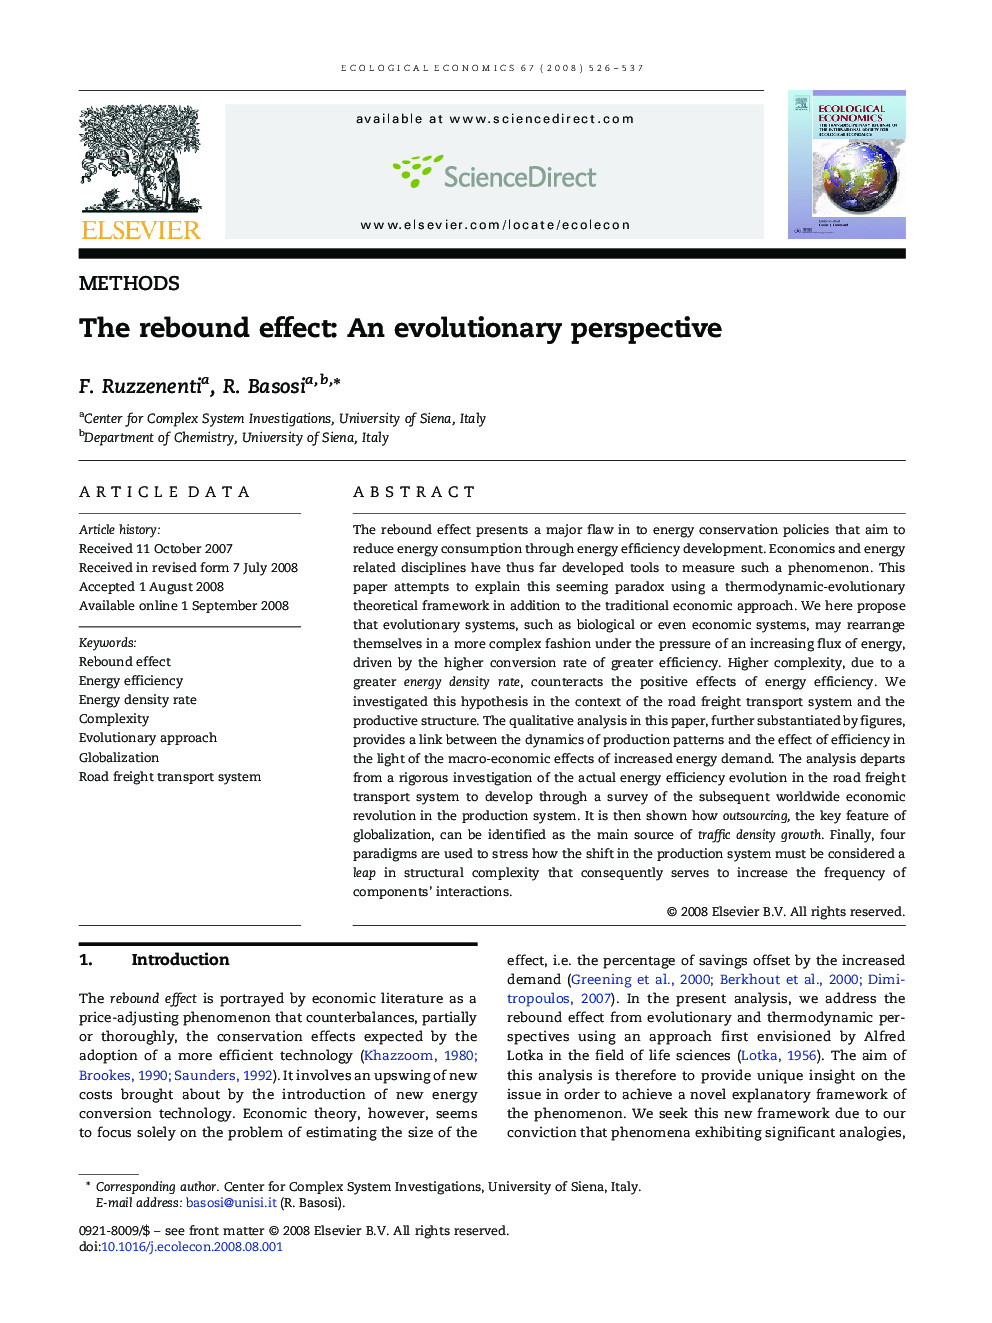 The rebound effect: An evolutionary perspective